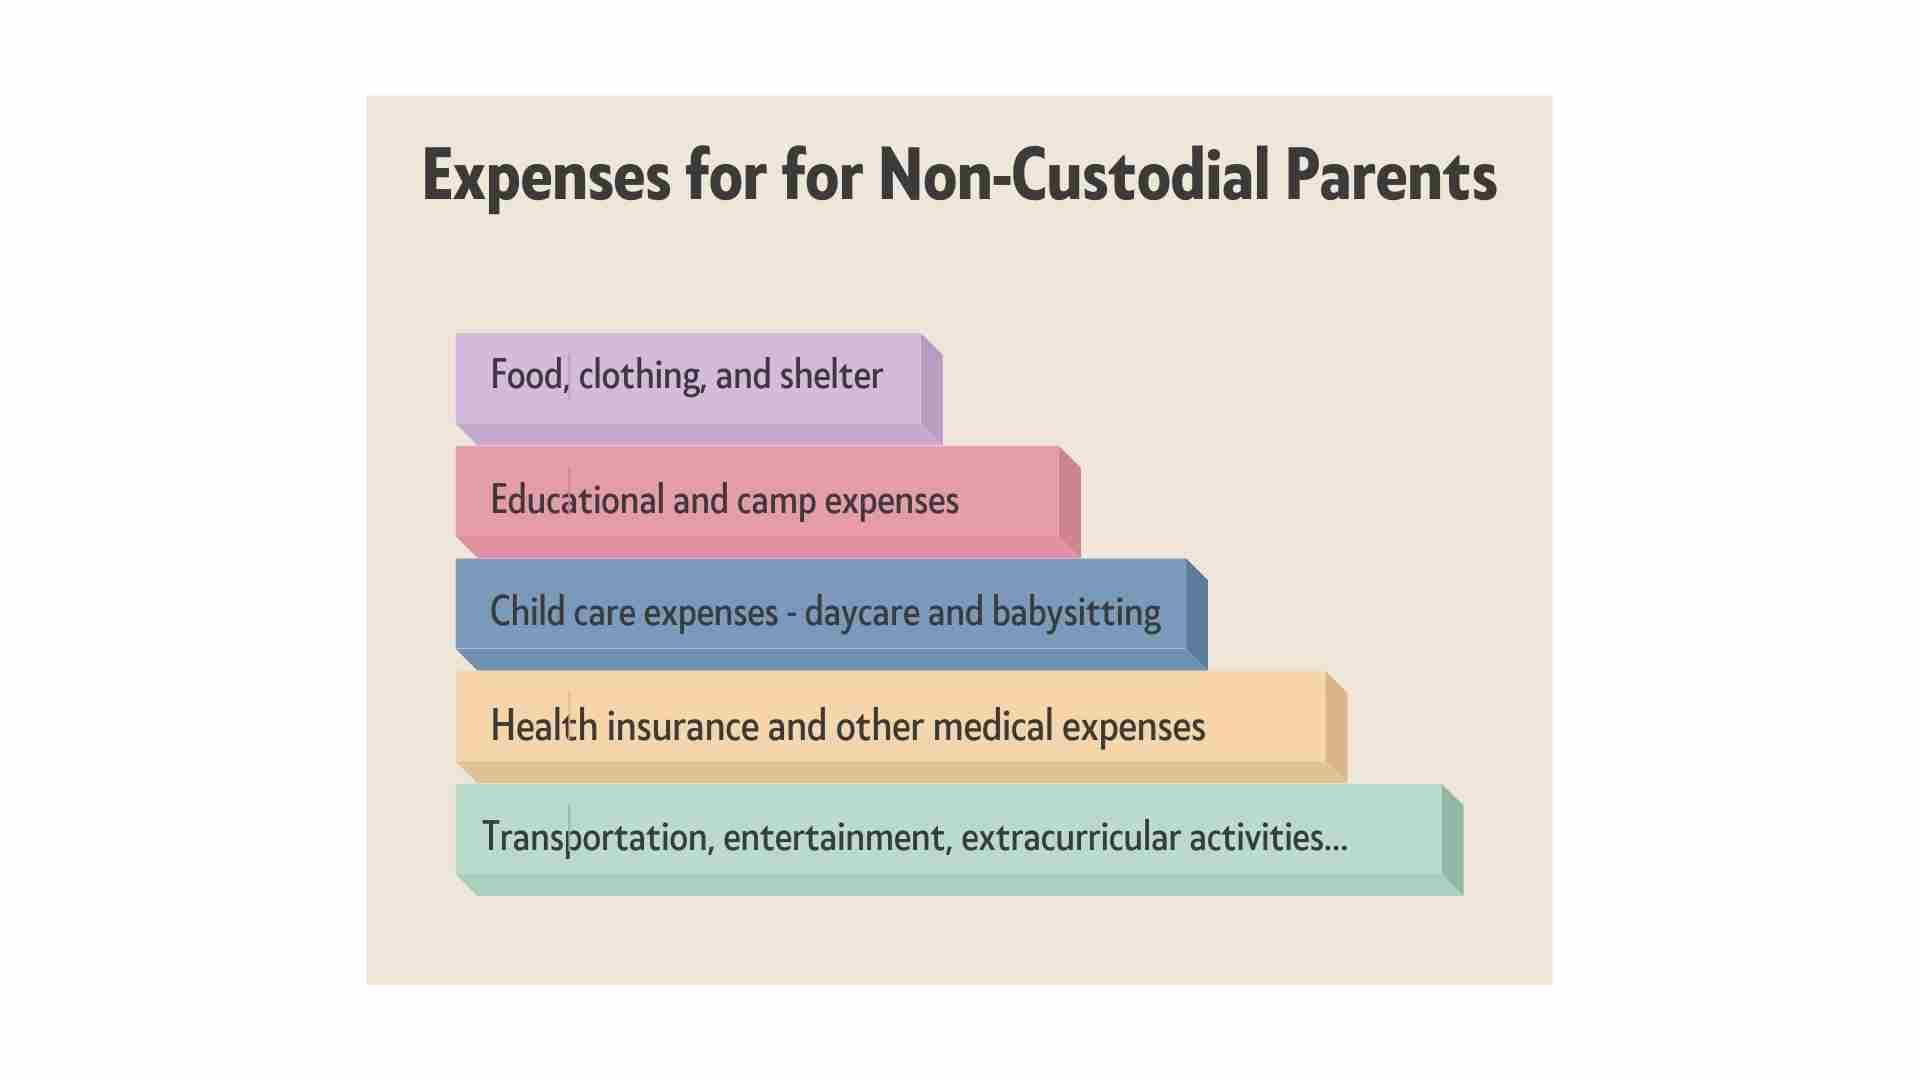 A chart displaying categories of expenses for non-custodial parents: food, clothing, shelter, educational and camp expenses, child care insurance - daycare and babysitting, health insurance,